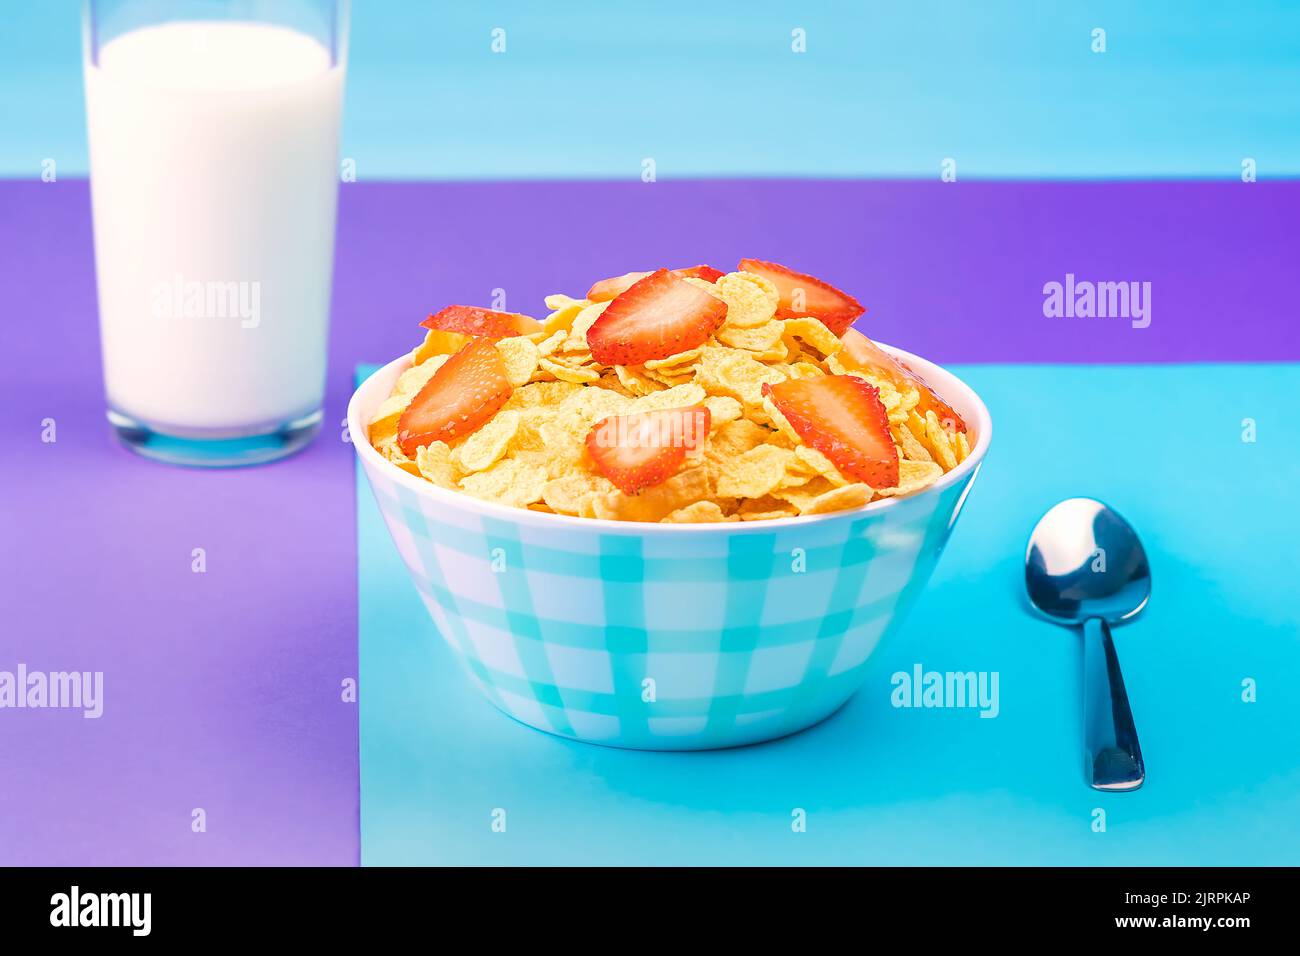 View of a plate with natural cereal and red strawberries with a glass of fresh milk against a background of pastel colors. Stock Photo